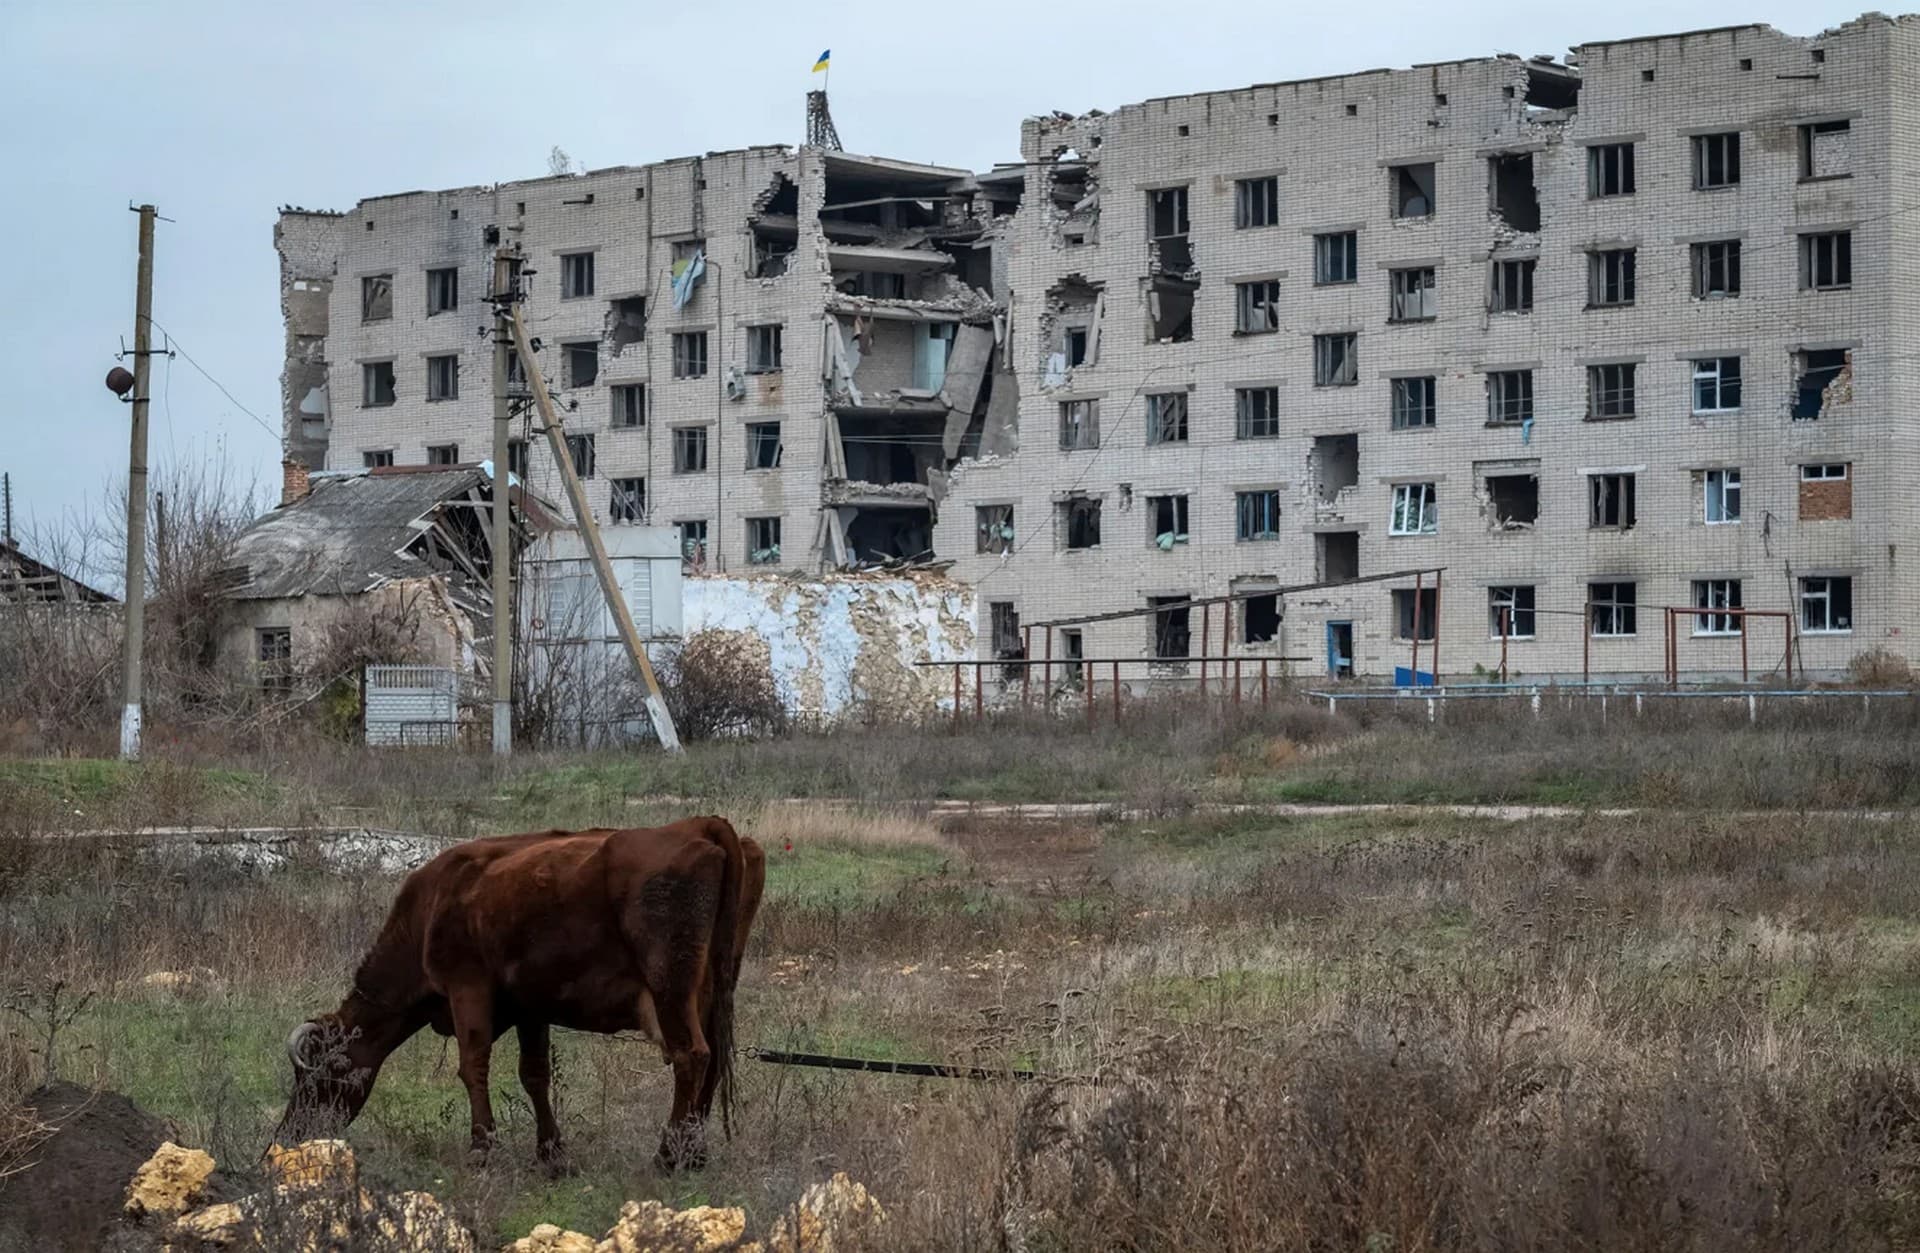 A cow grazes near a damaged house in the village of Arkhanhelske